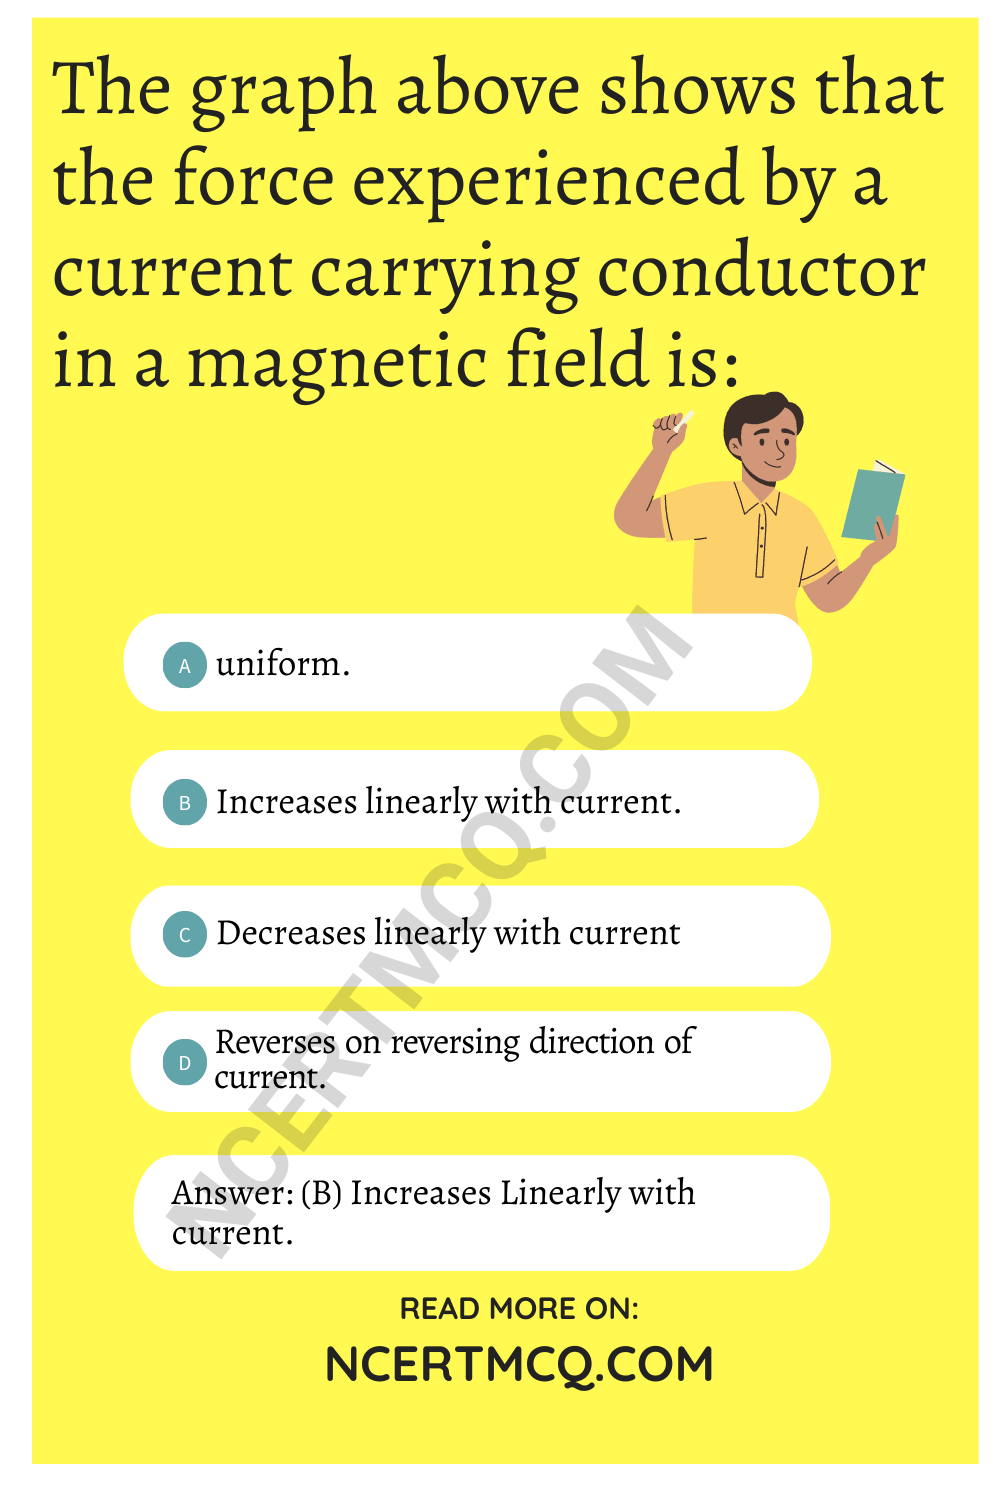 The graph above shows that the force experienced by a current carrying conductor in a magnetic field is: